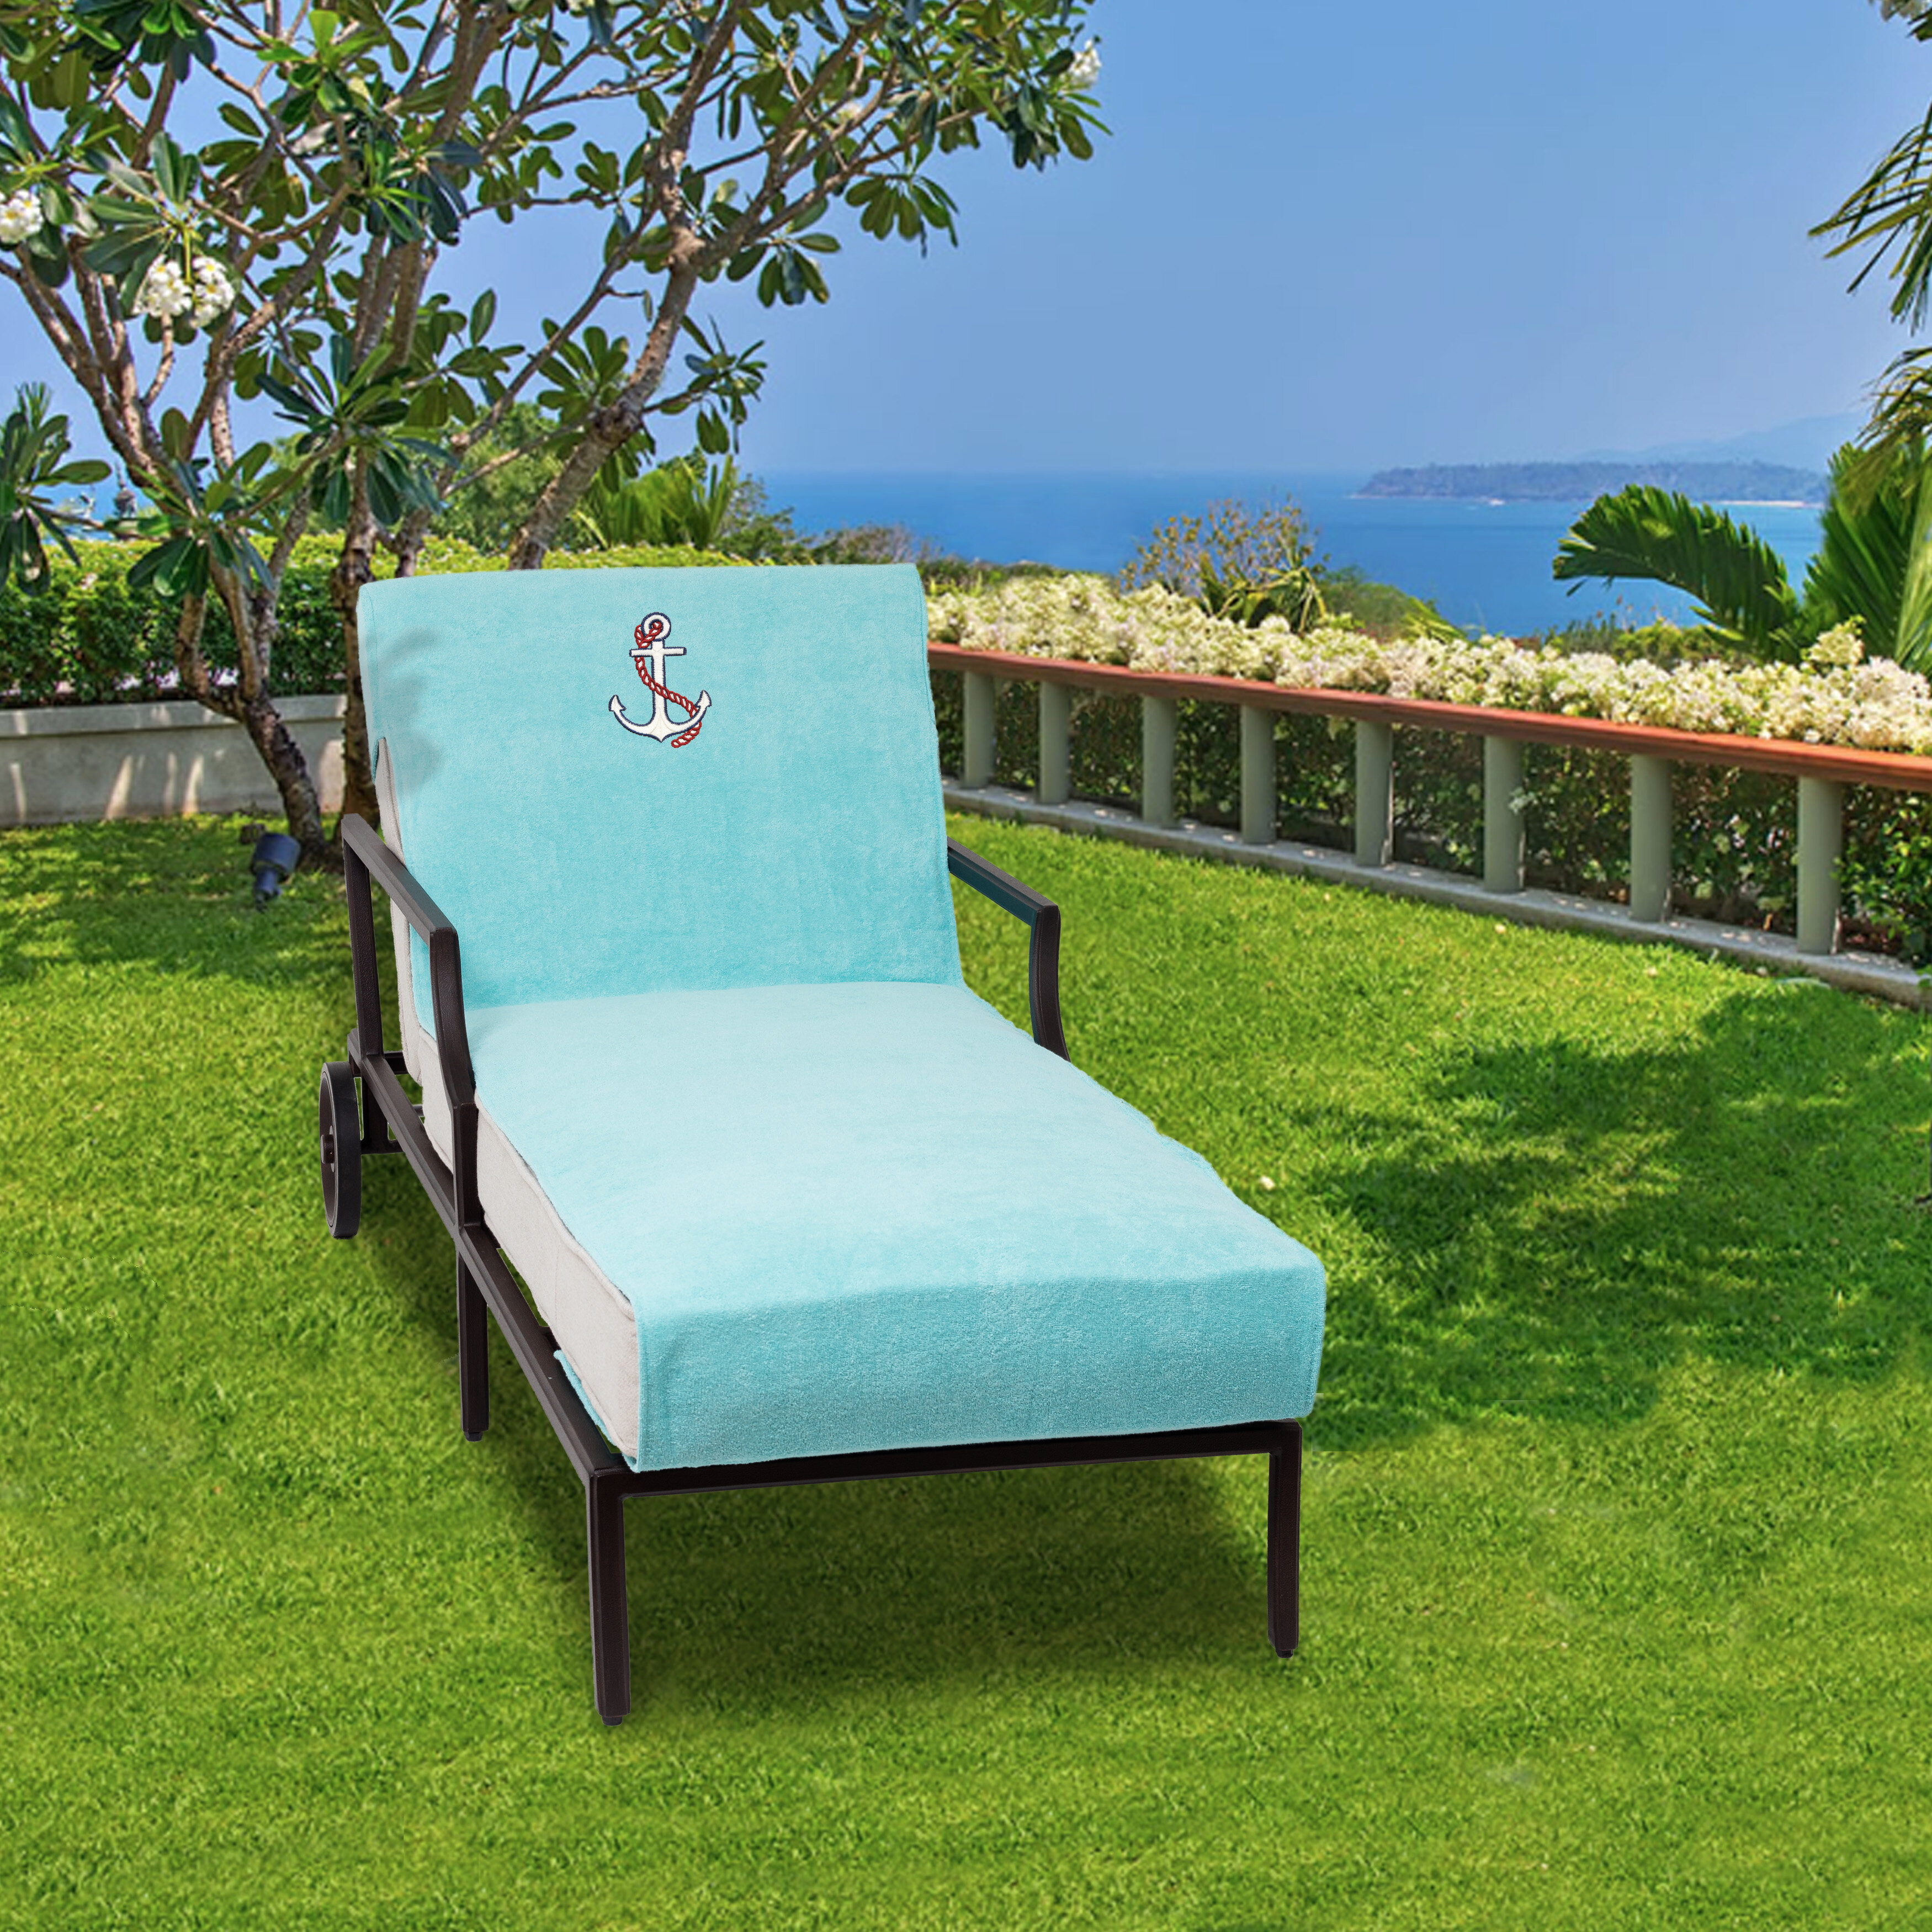 Aqua Linum Home Textiles Standard Size Chaise Lounge Cover with Side Pockets